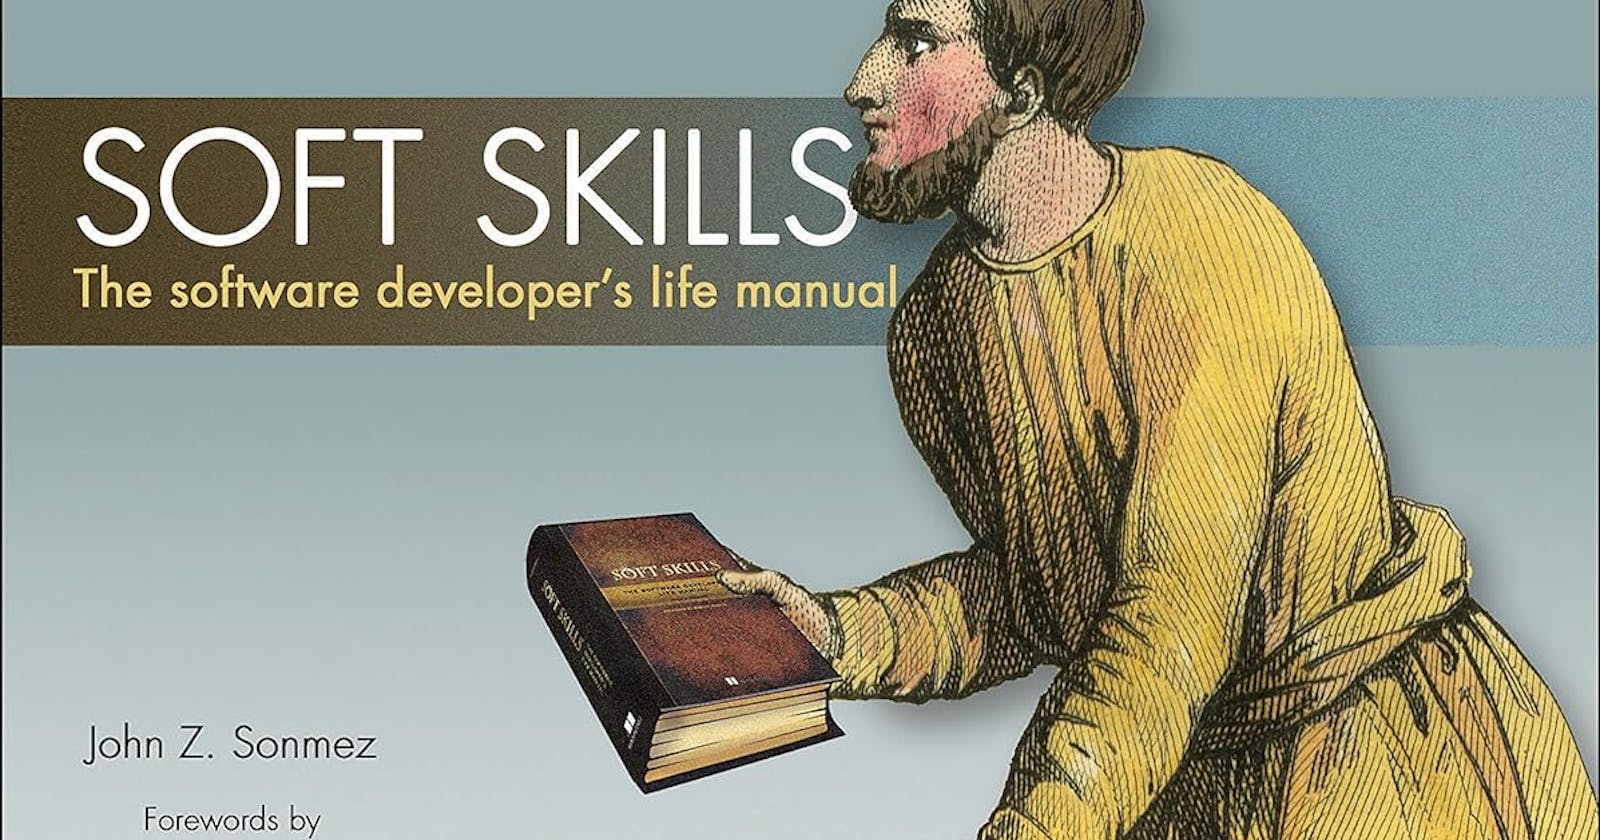 Review of "Soft Skills" the software developers manual